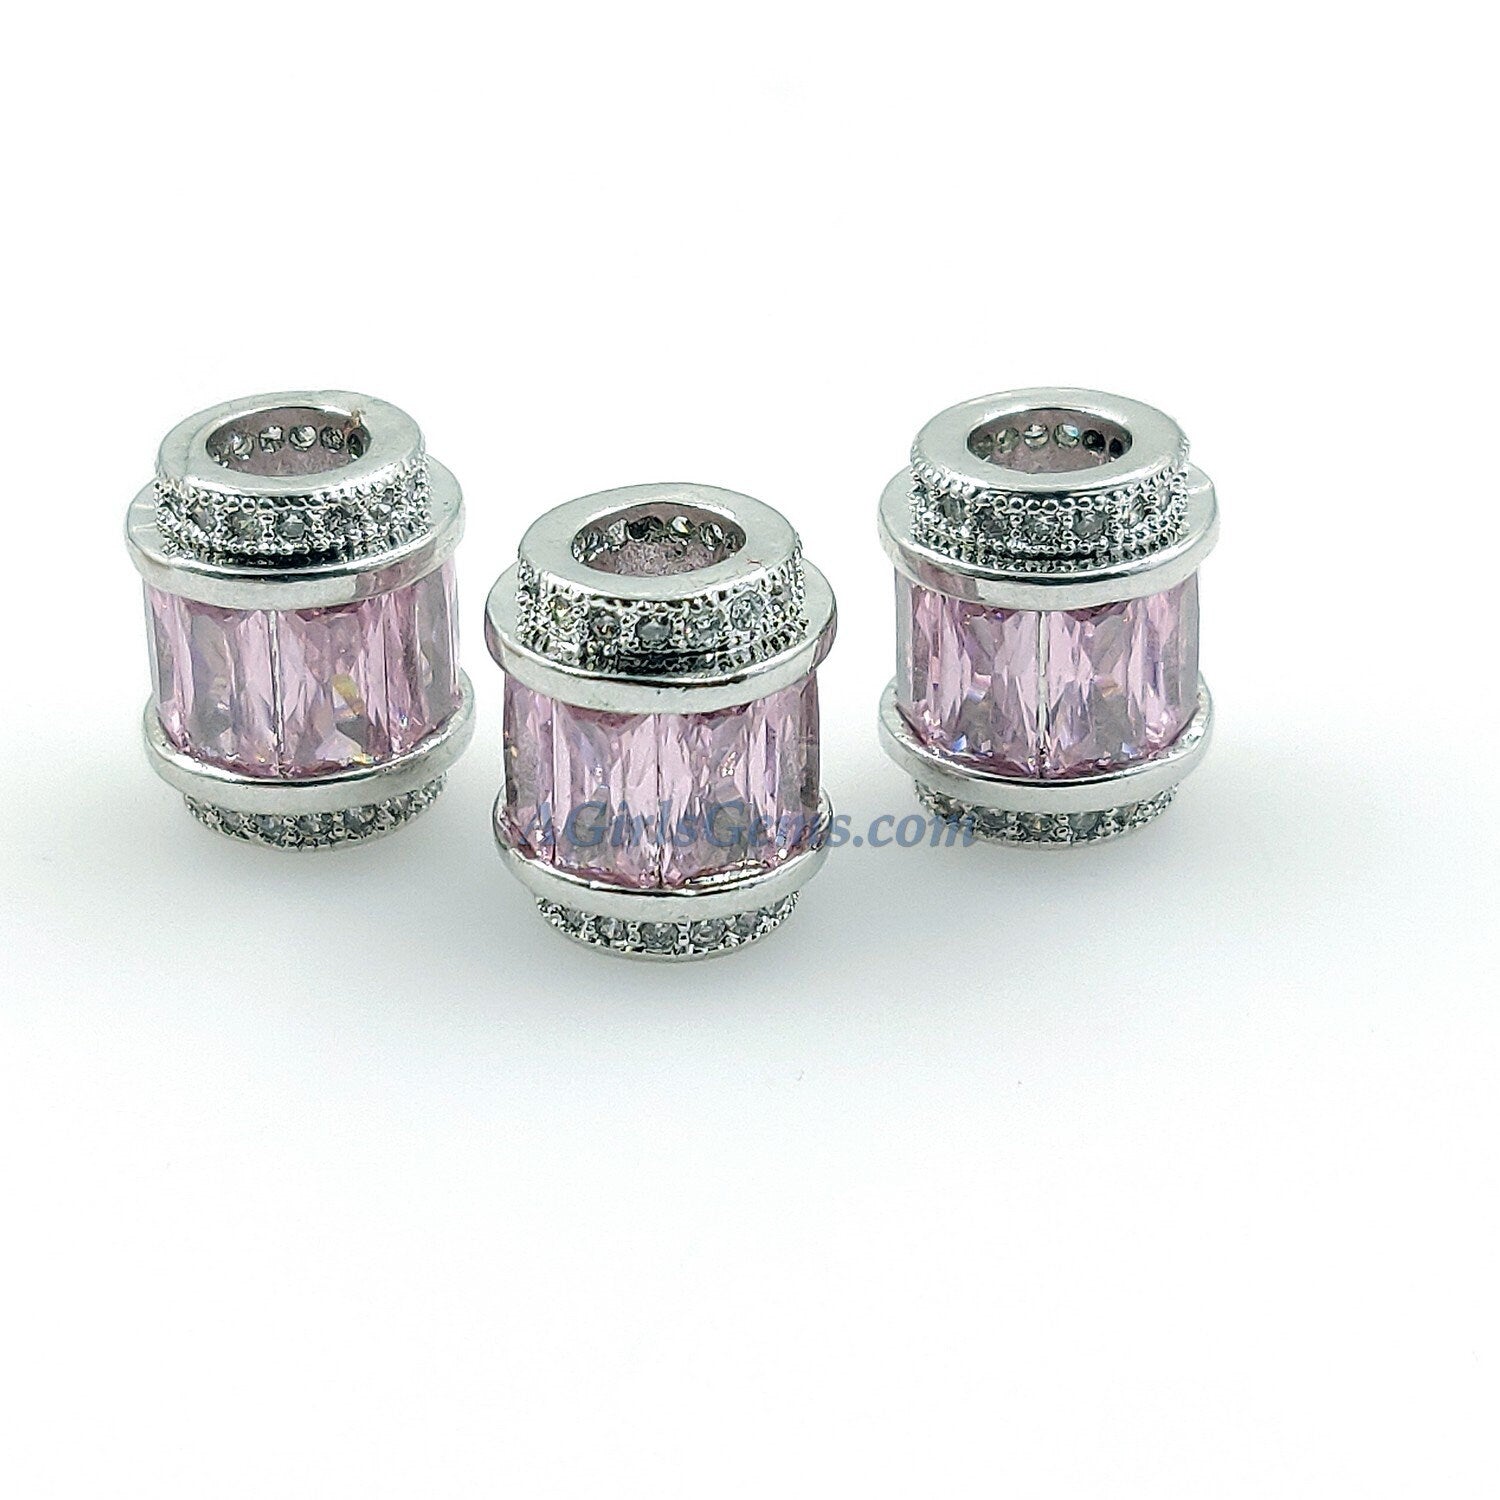 Pink Beads, CZ Micro Pave Silver Tube Beads, Large Hole Beads 10 x 12 mm